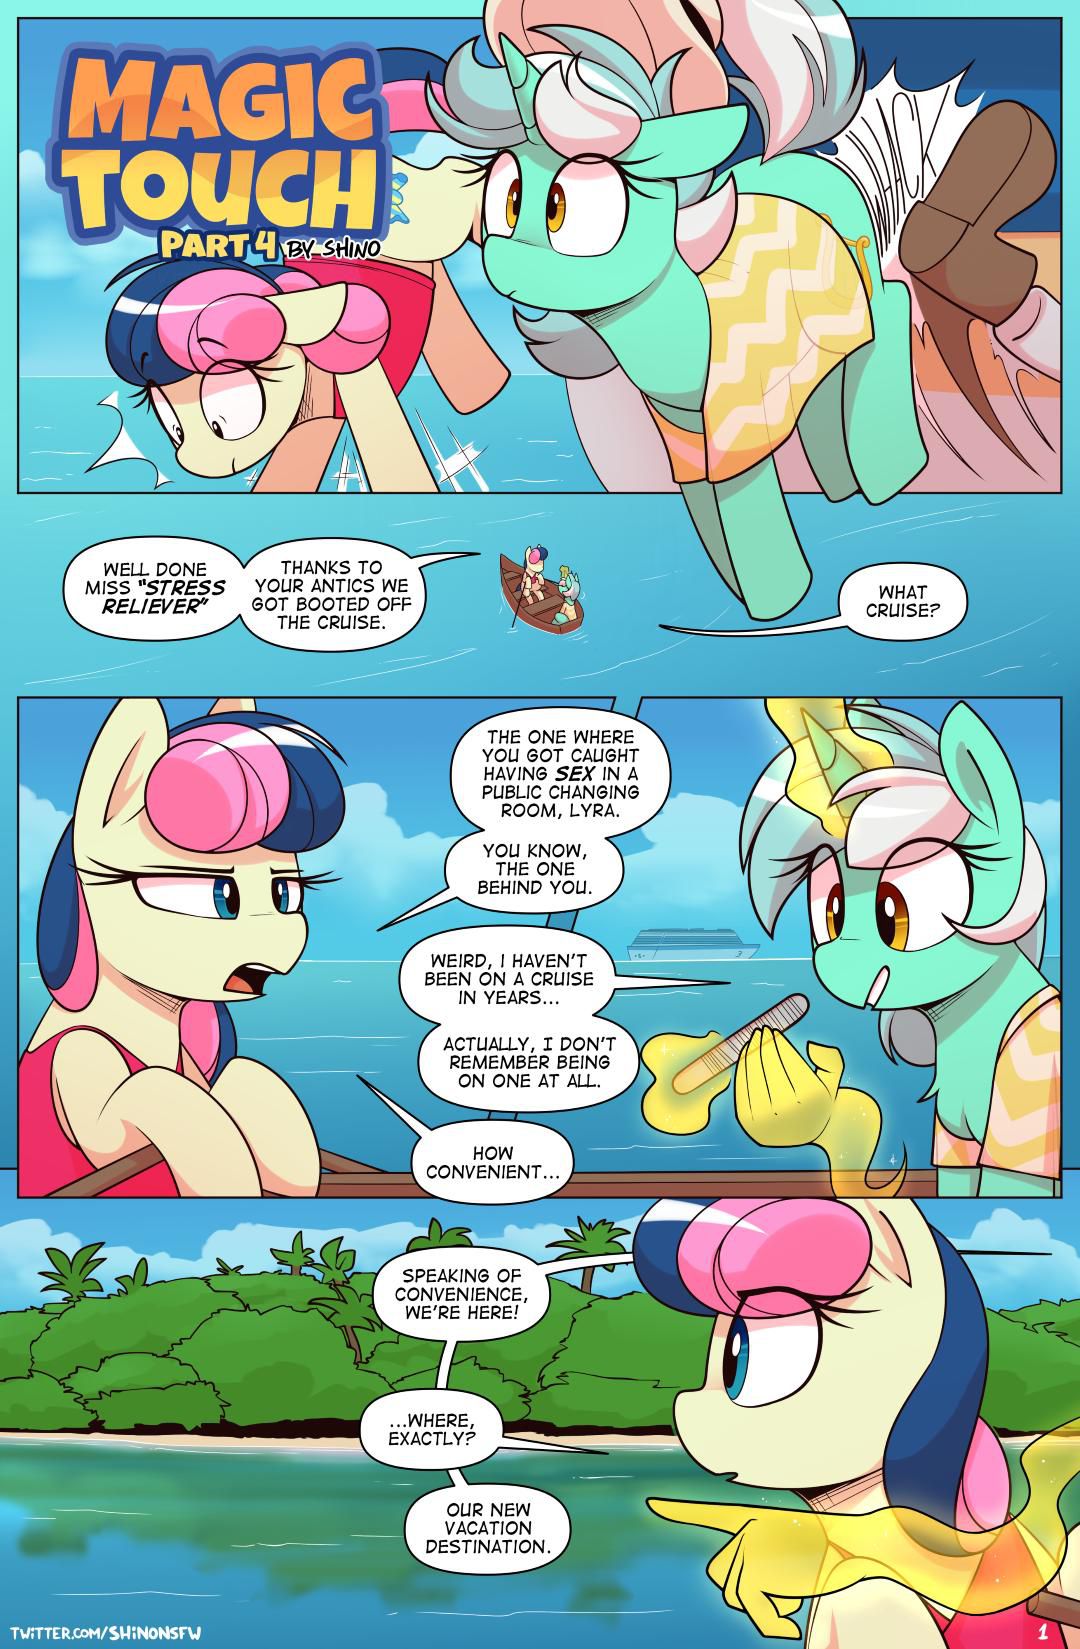 Magic Touch: Part Four (MLP:FiM) by Shinodage [Ongoing] 1